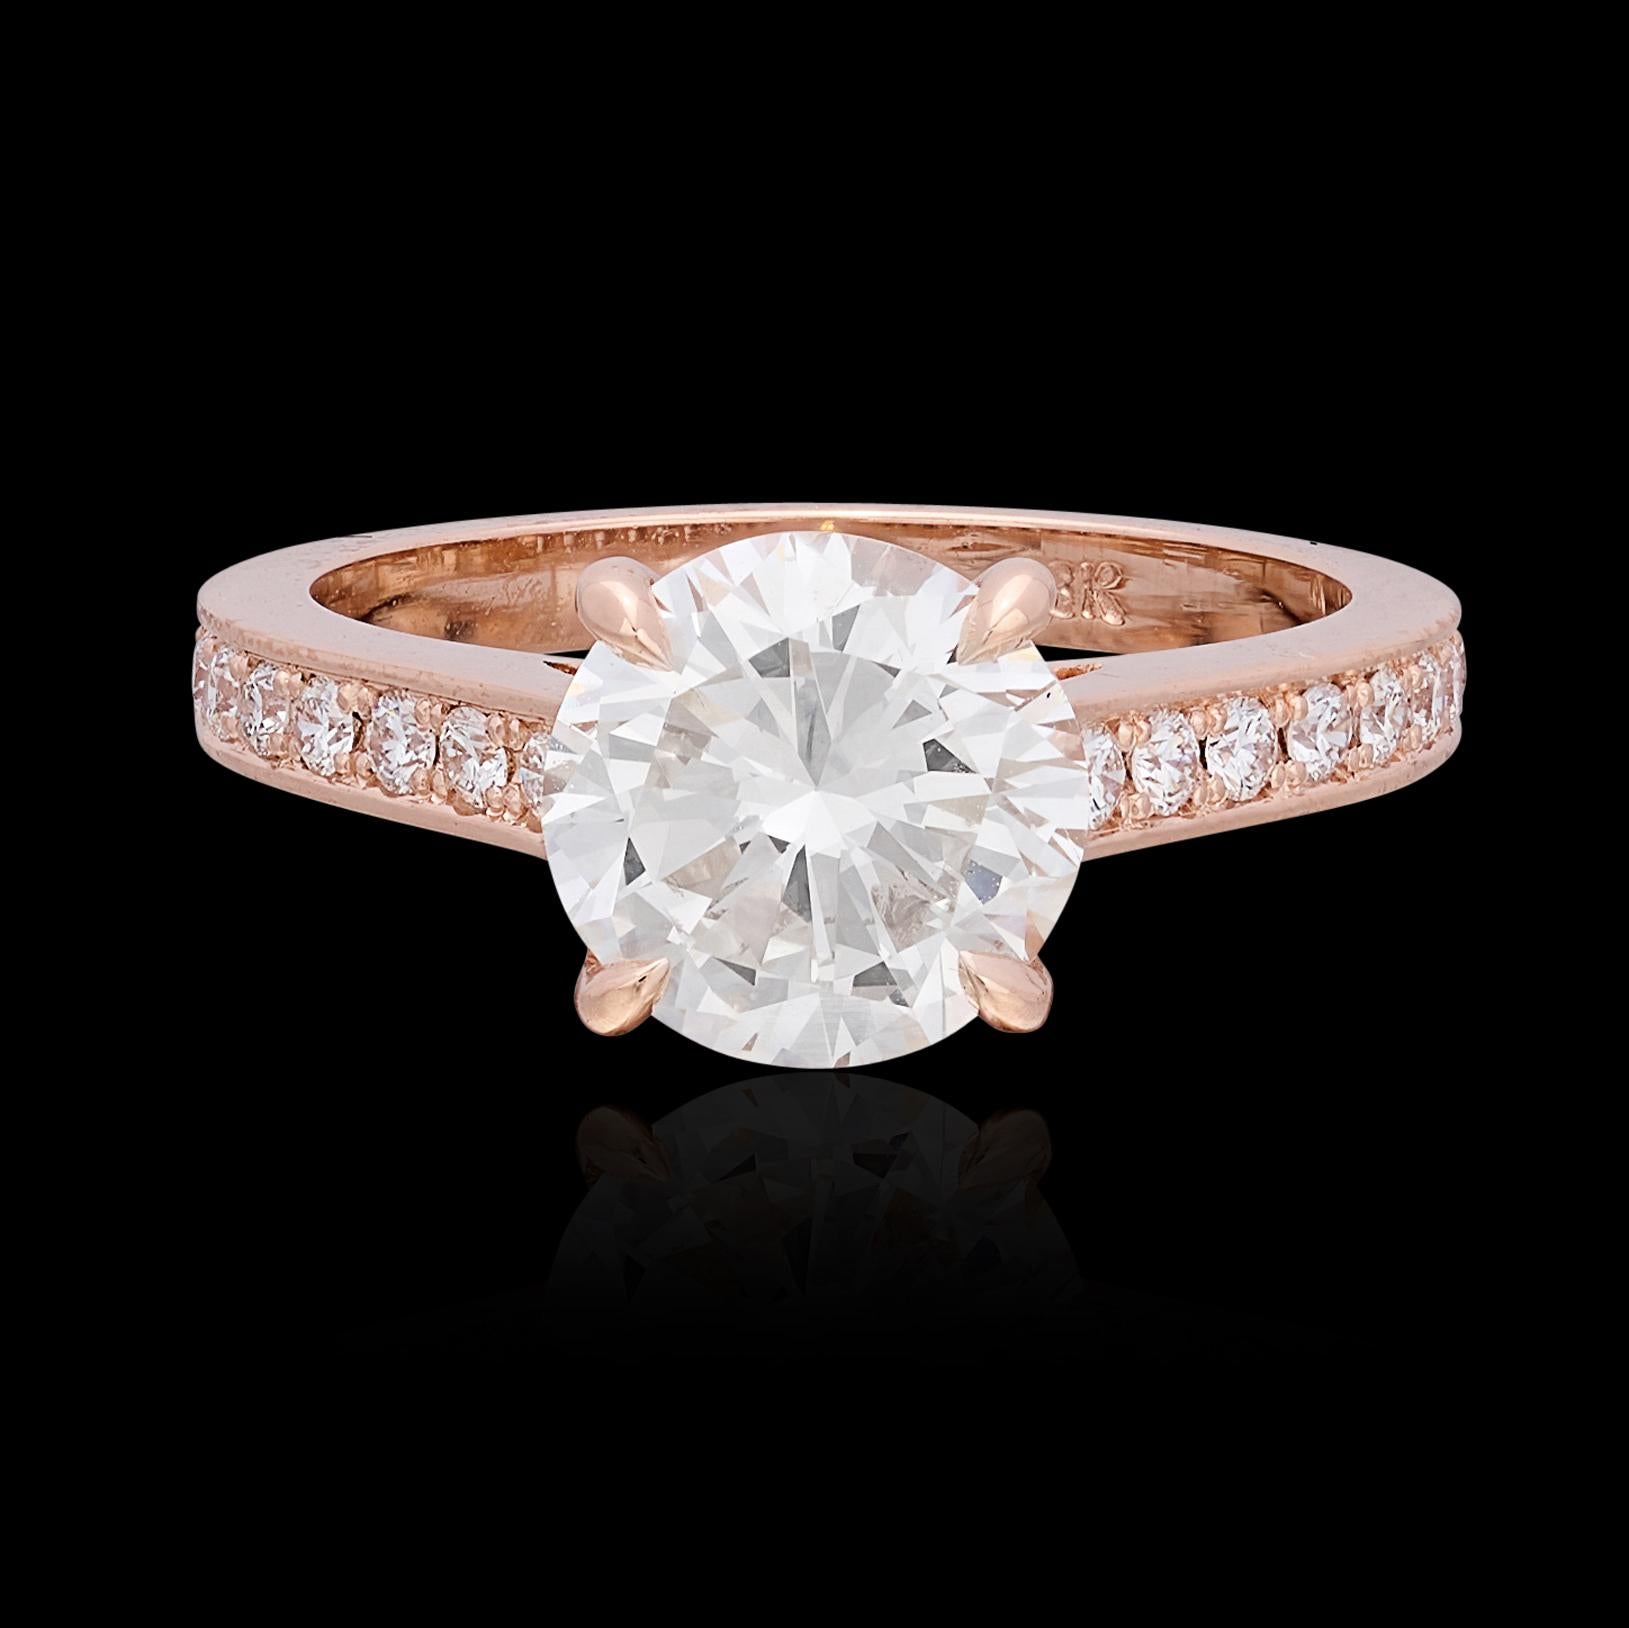 A classic beauty featuring an incredible center stone. This 18 karat rose gold stunner centers on a 2.22 carat round brilliant cut diamond with sparkle and fire to spare! The center stone has been graded by The Gemological Institute of America as